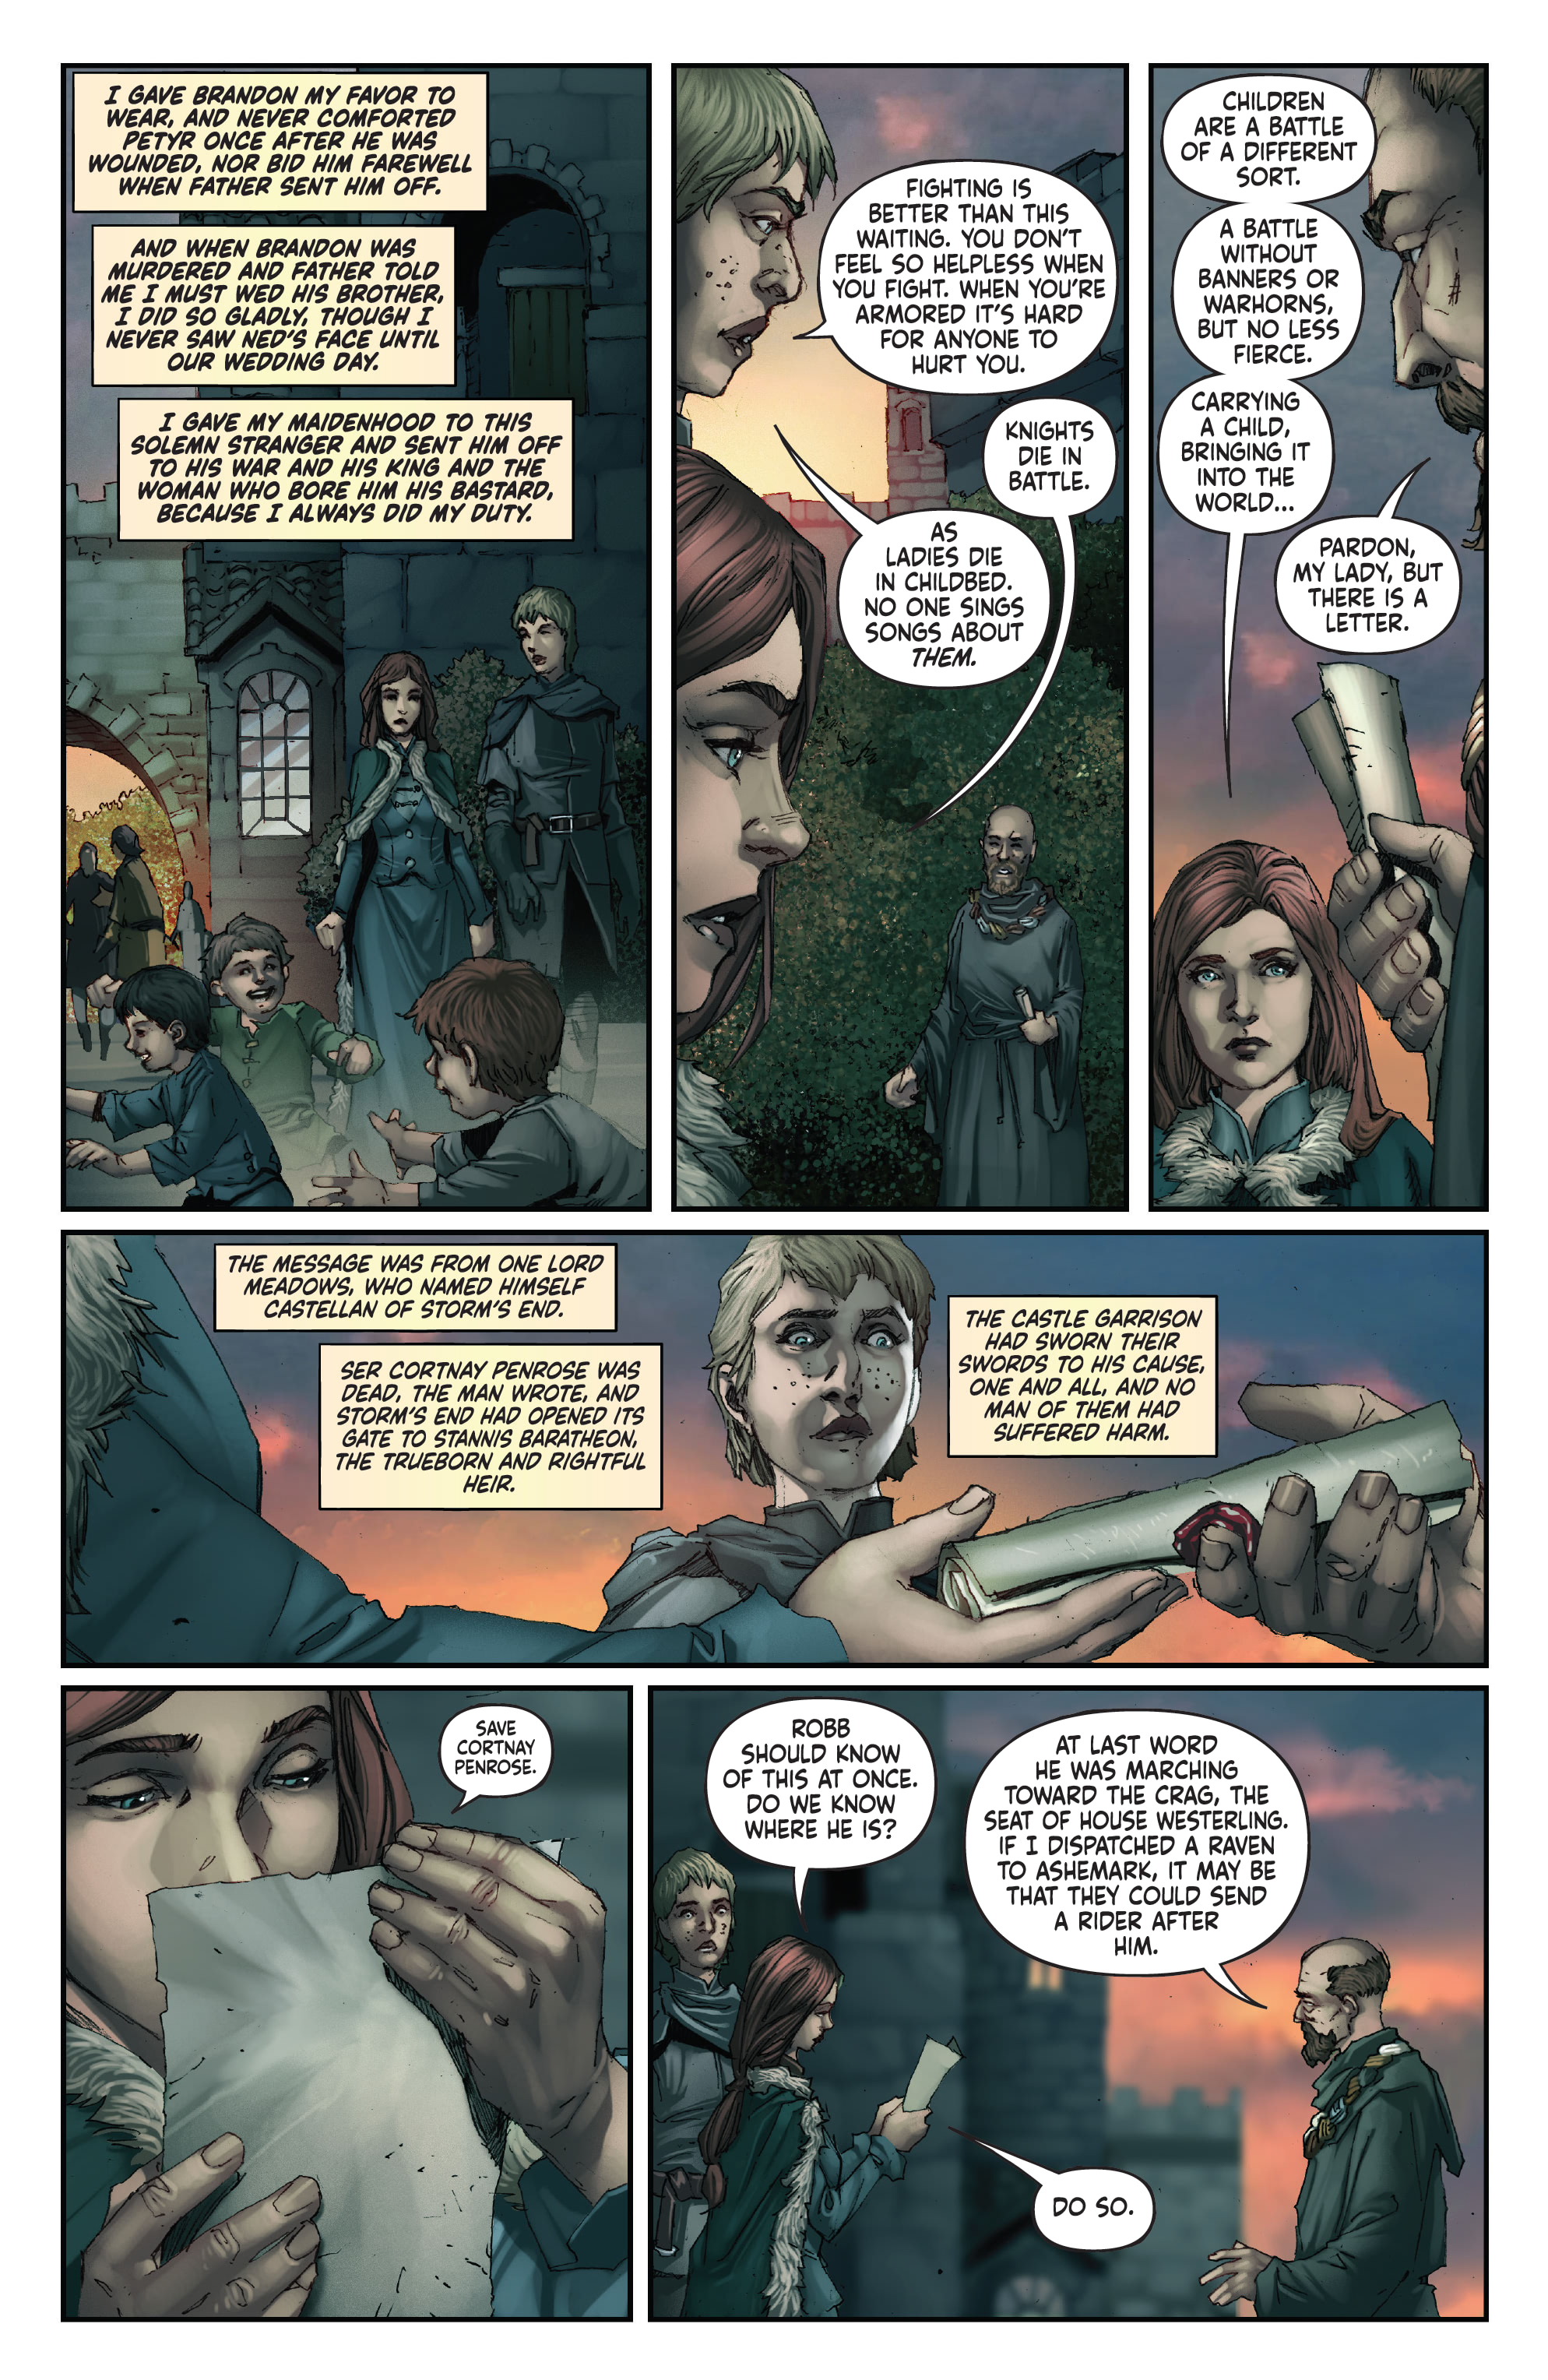 George R.R. Martin's A Clash Of Kings: The Comic Book Vol. 2 (2020-): Chapter 6 - Page 5